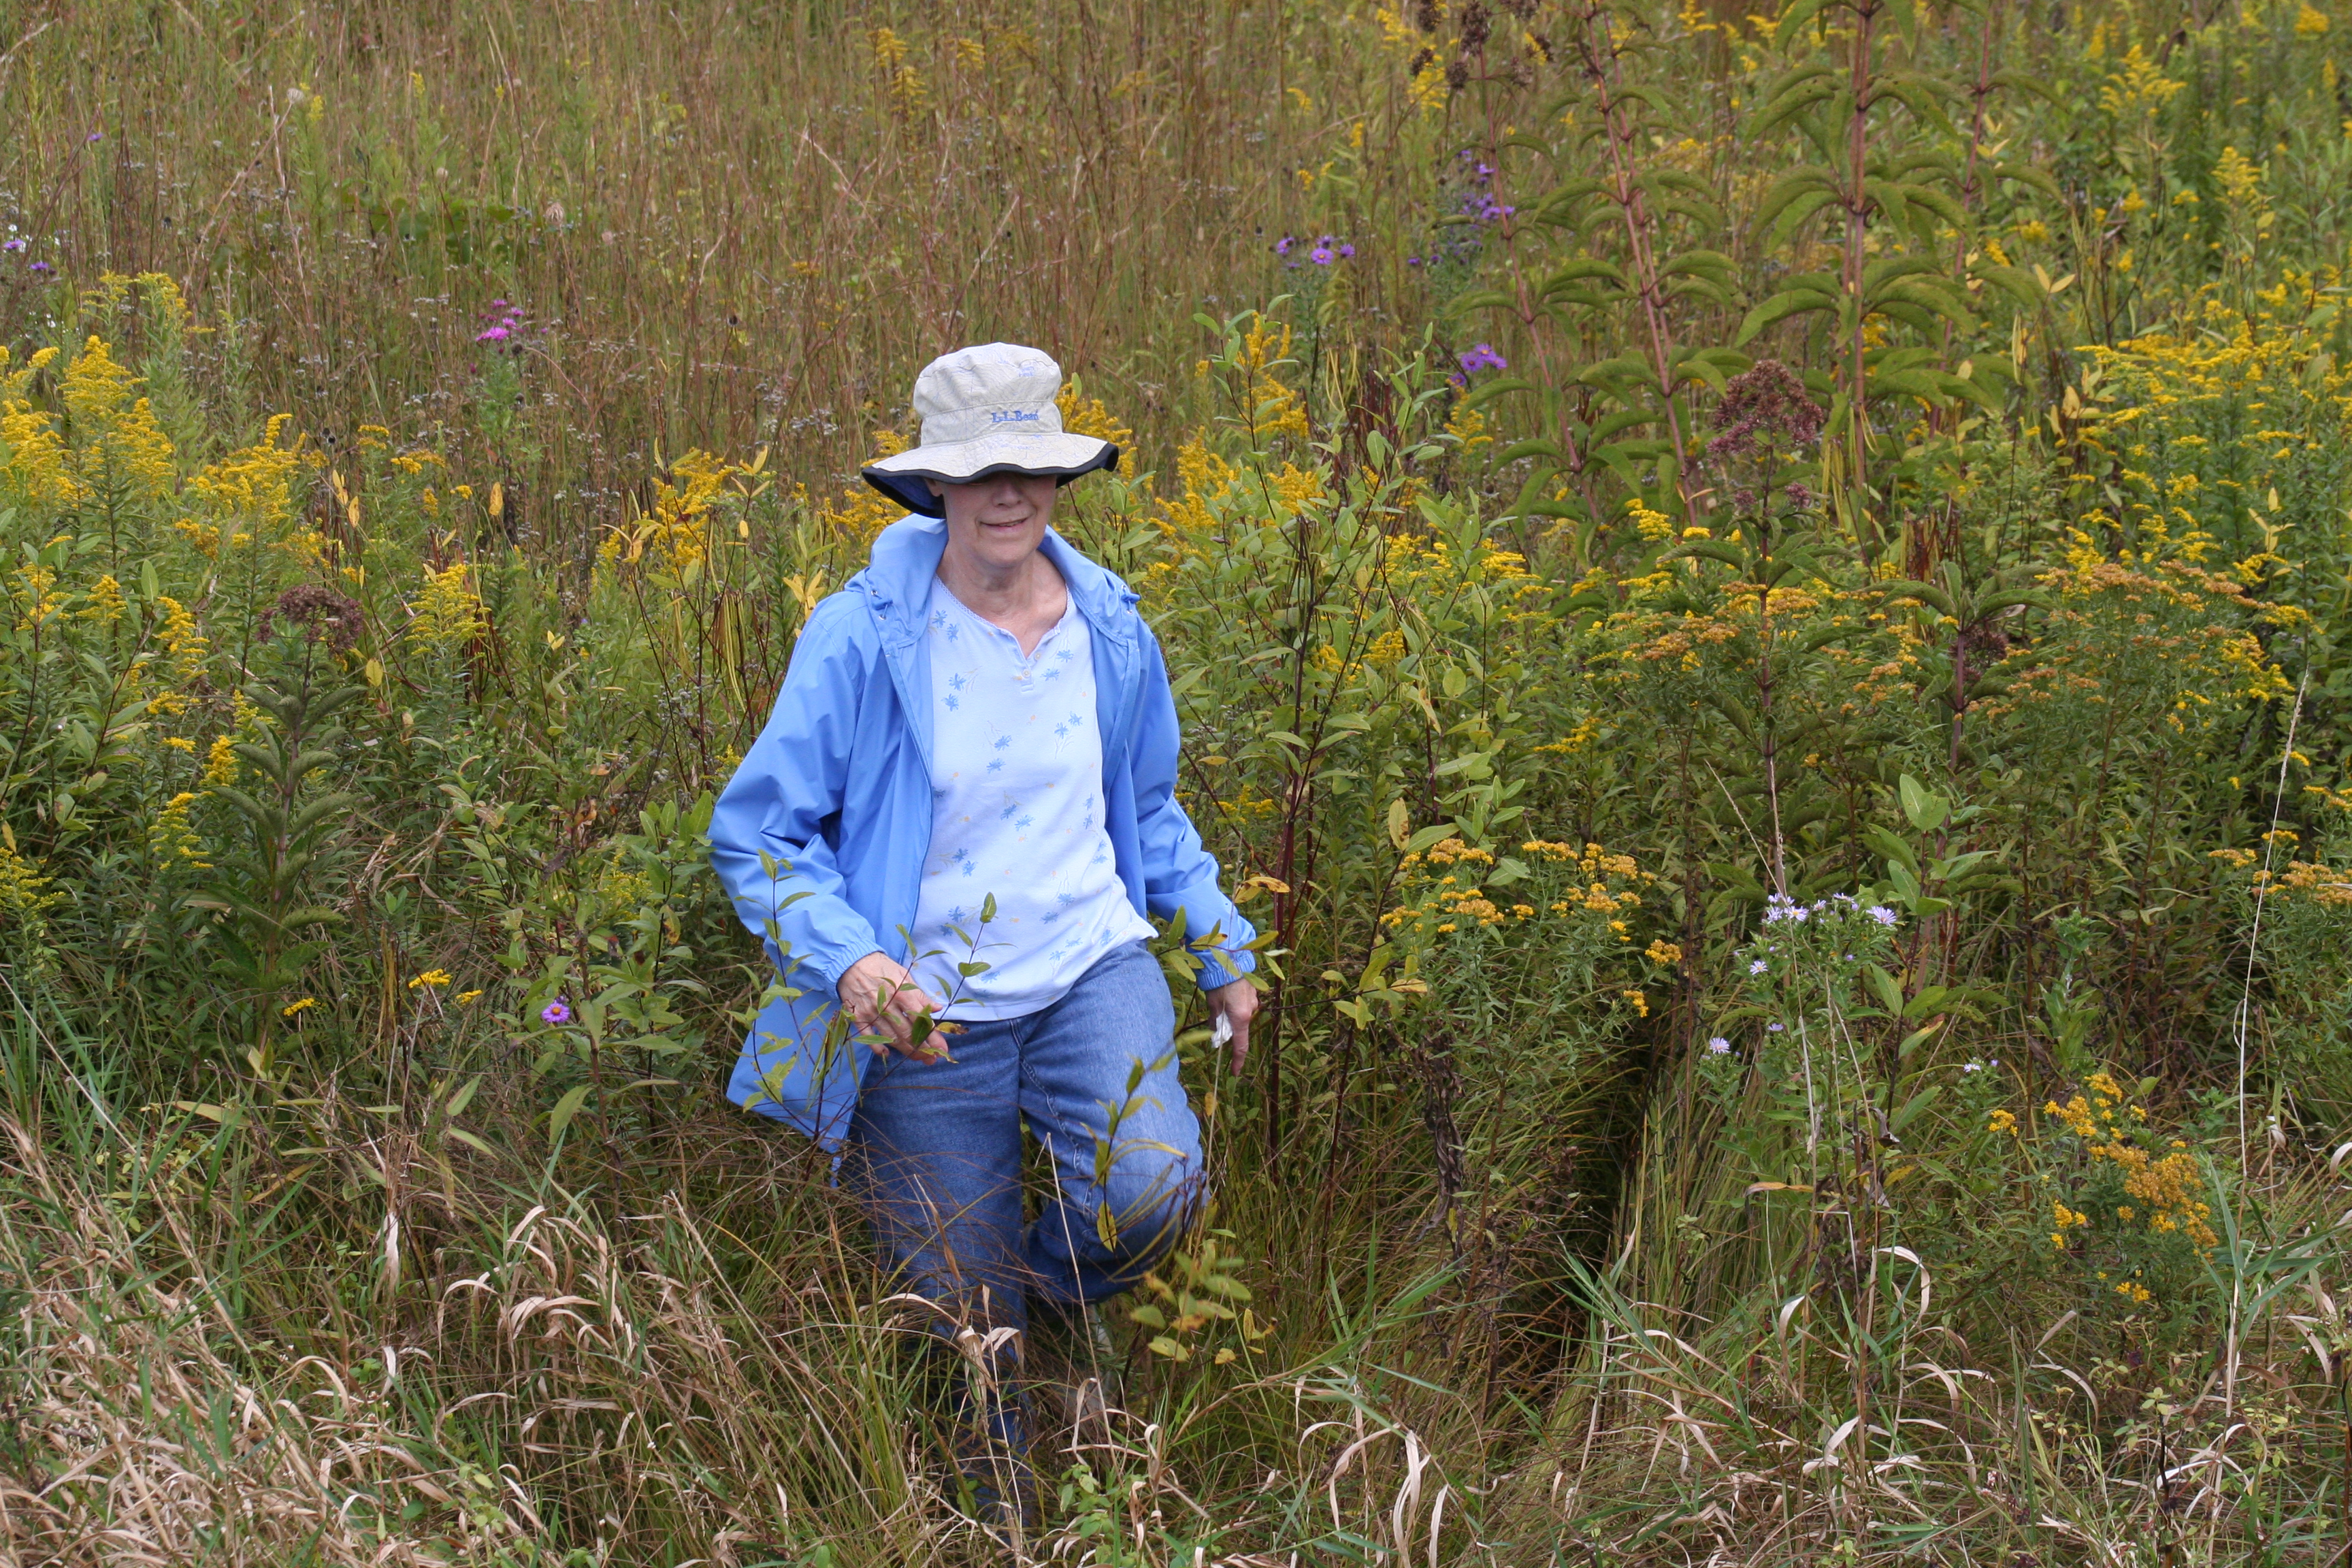 Mom in a meadow, on a beautiful afternoon together.